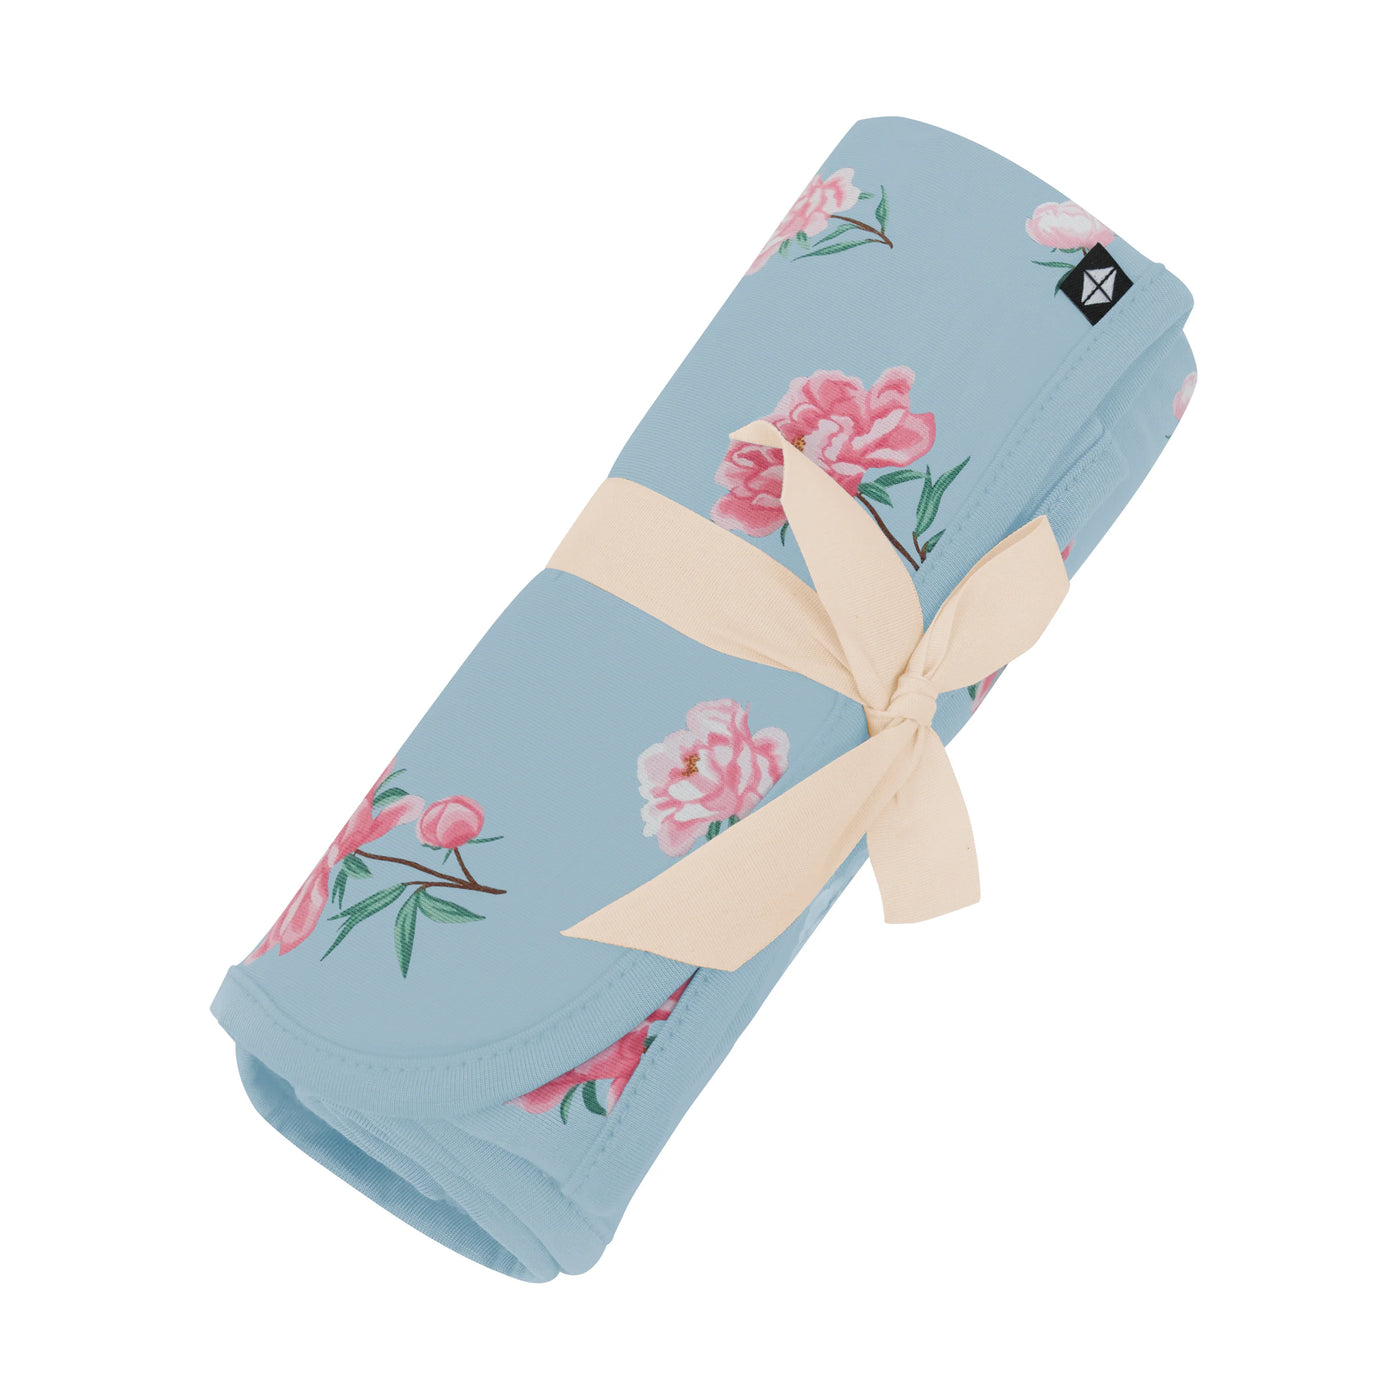 Kyte Baby Swaddle Blanket in Peony